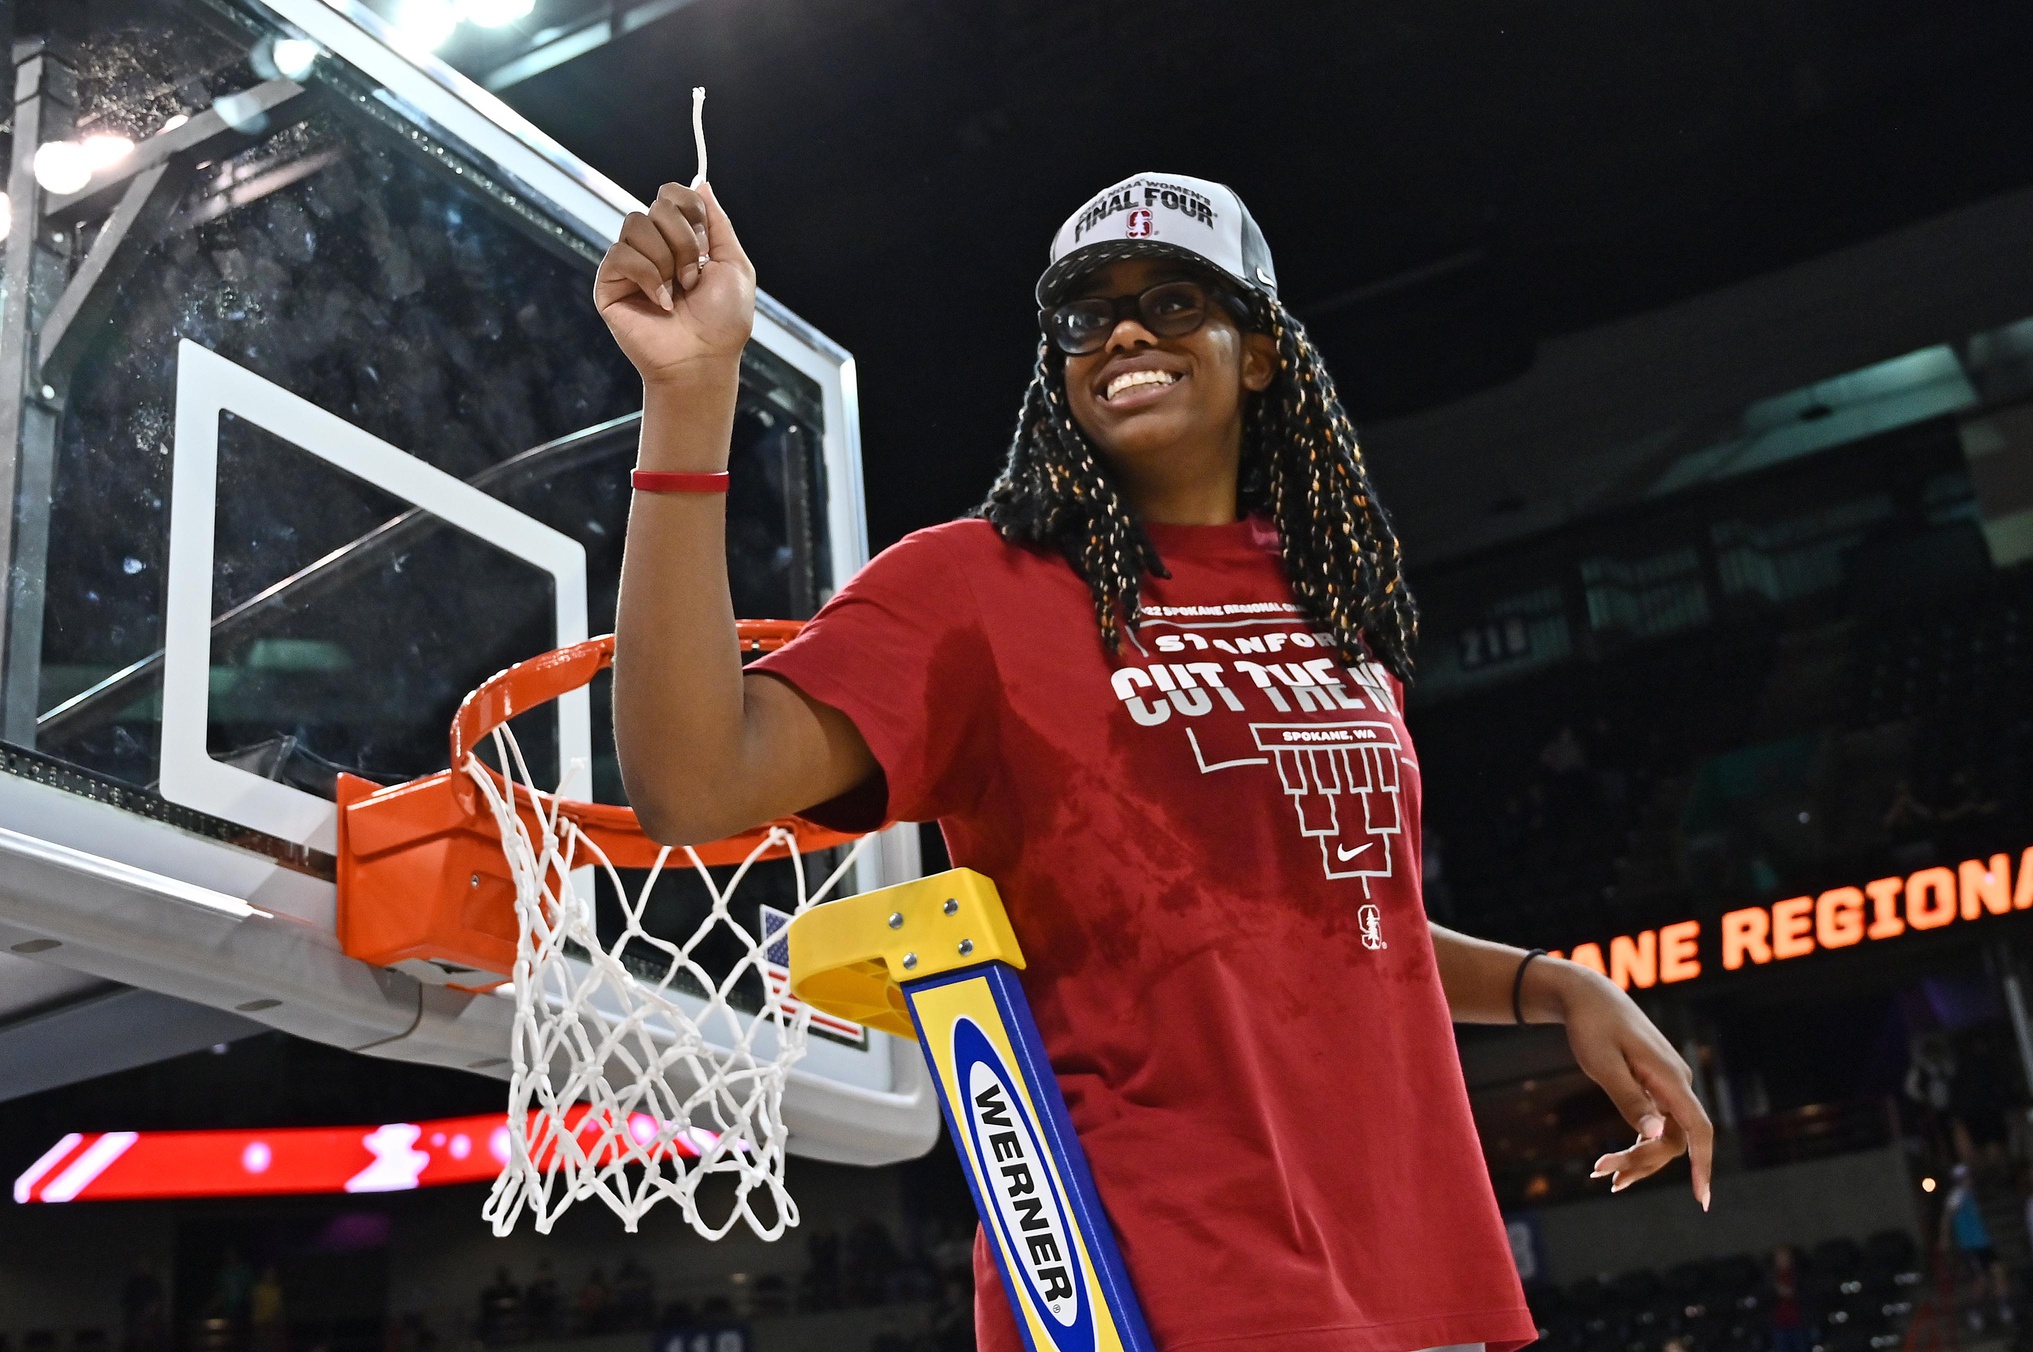 Mar 27, 2022; Spokane, WA, USA; Stanford Cardinal forward Francesca Belibi (5) holds a piece of the net after a game against the Texas Longhorns in the Spokane regional finals. Credit: James Snook-USA TODAY Sports.